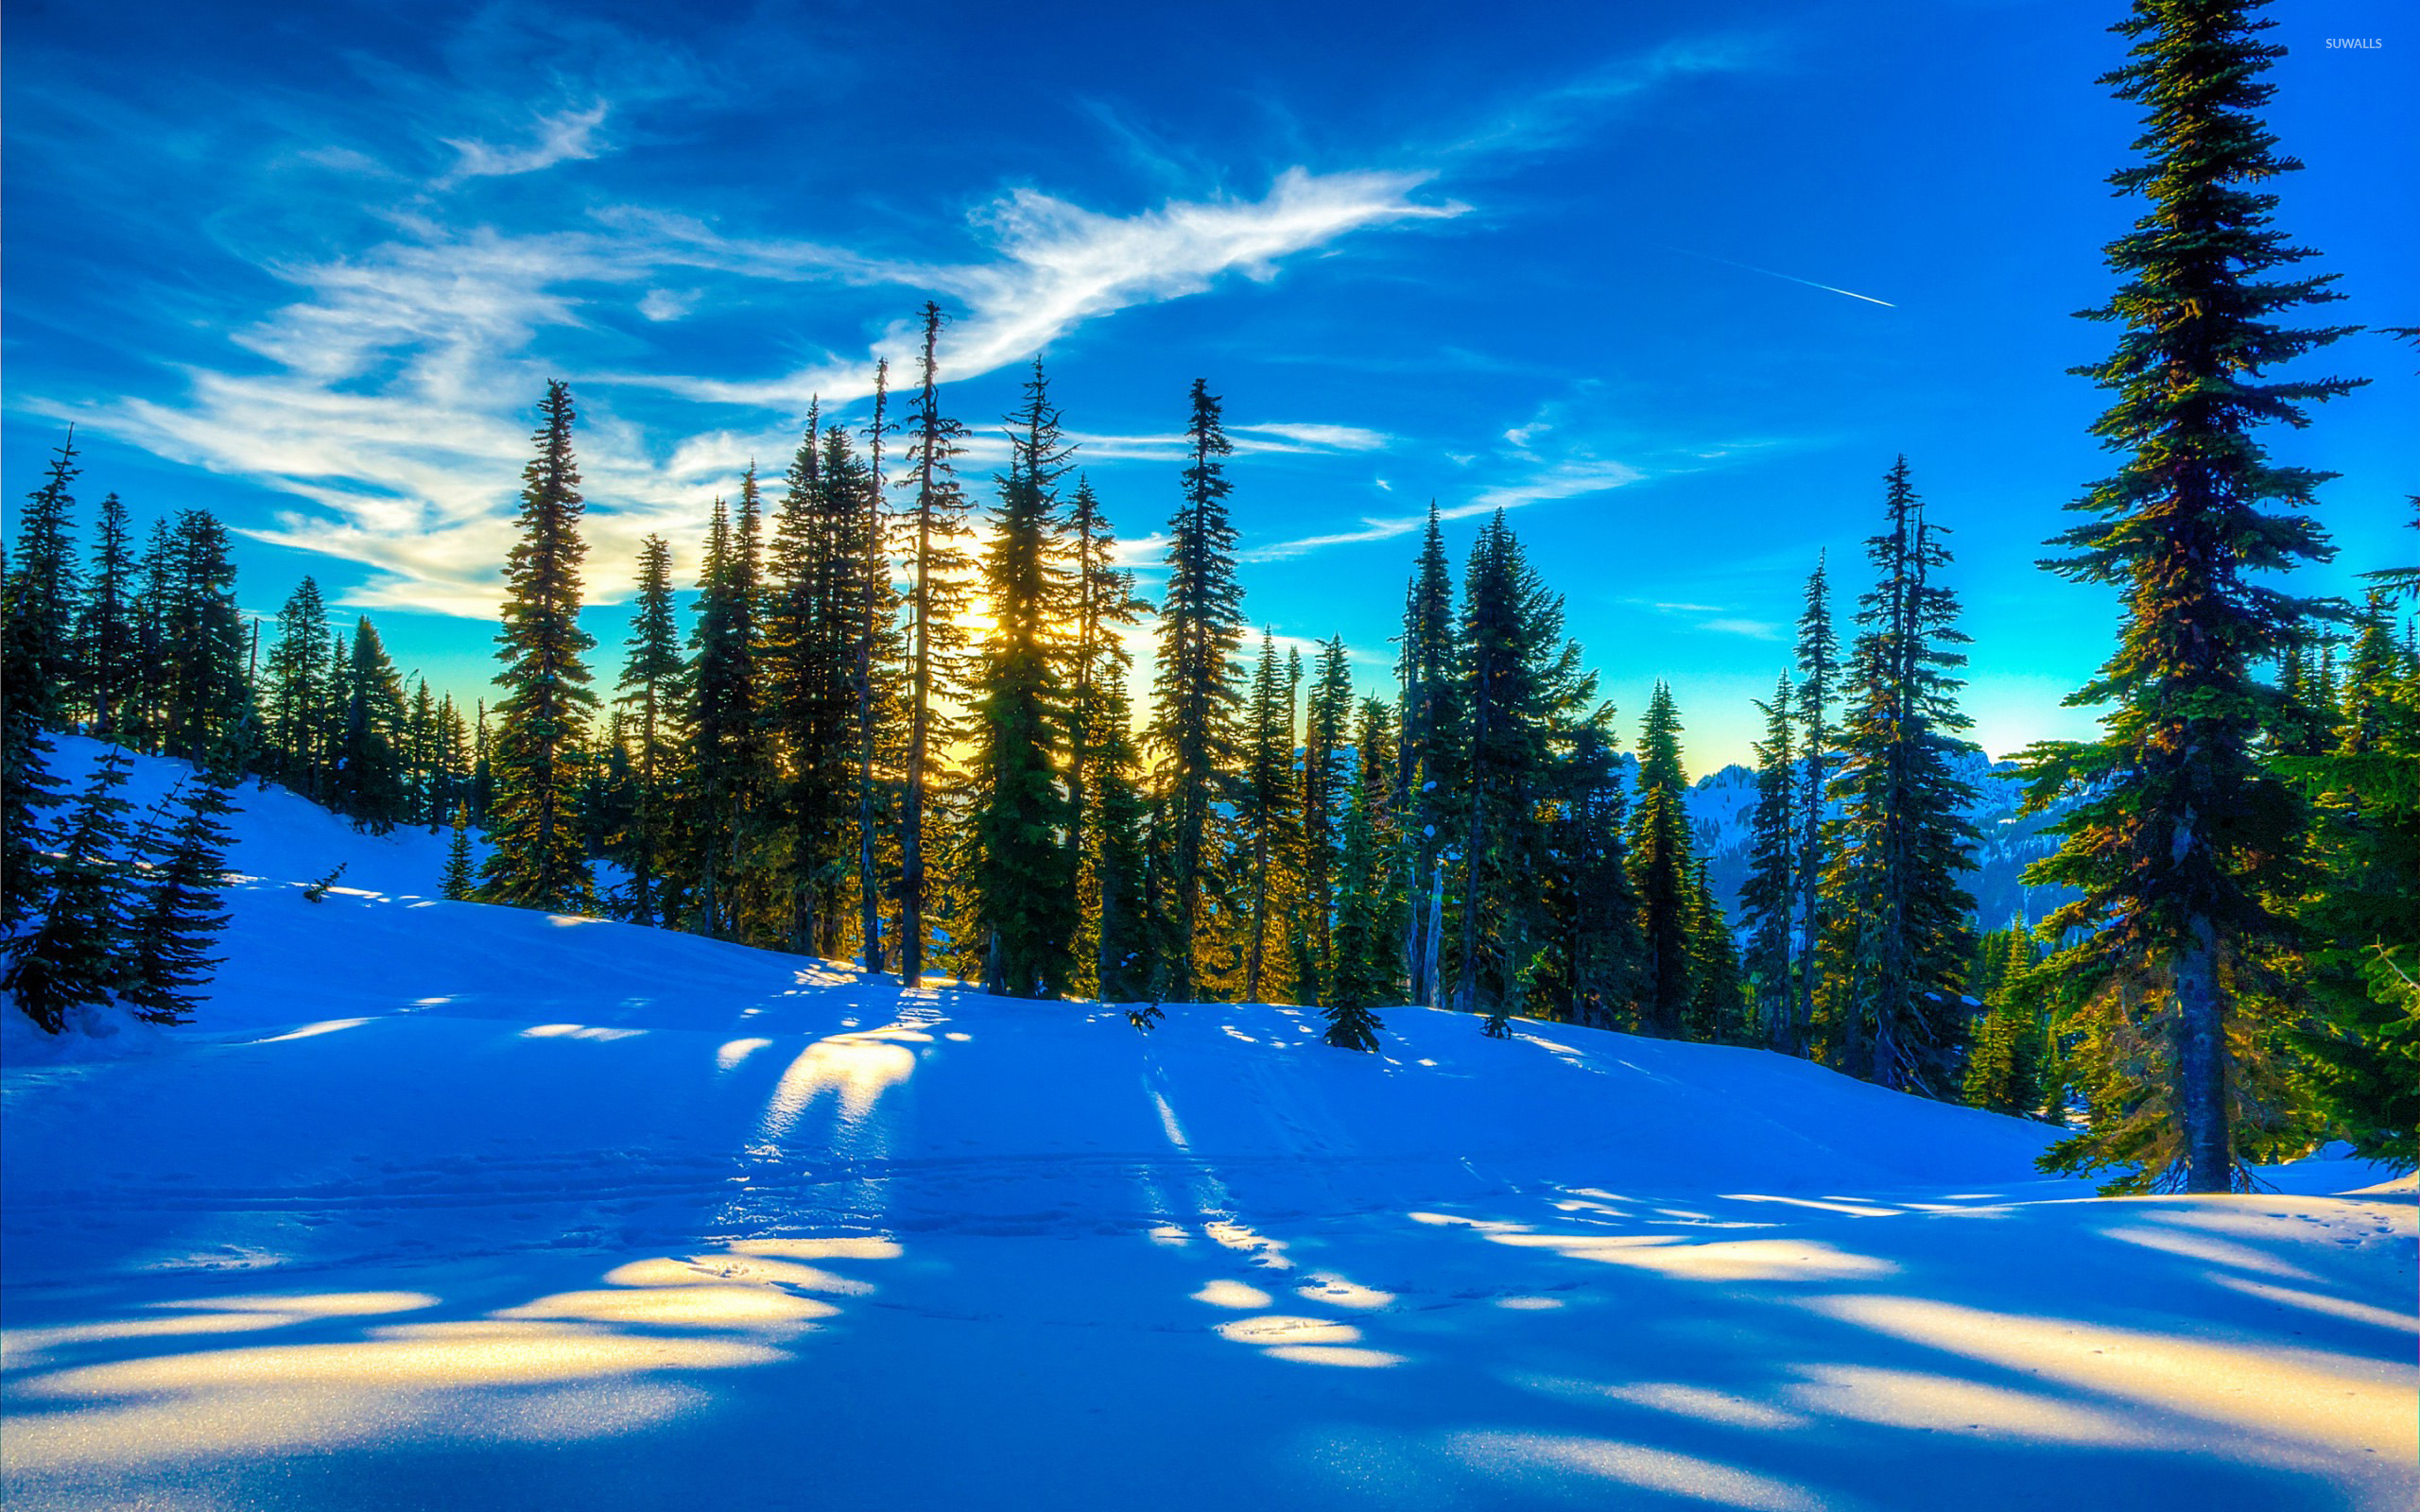 Sunlight reflecting in the snow wallpaper   Nature wallpapers   48019 2560x1600